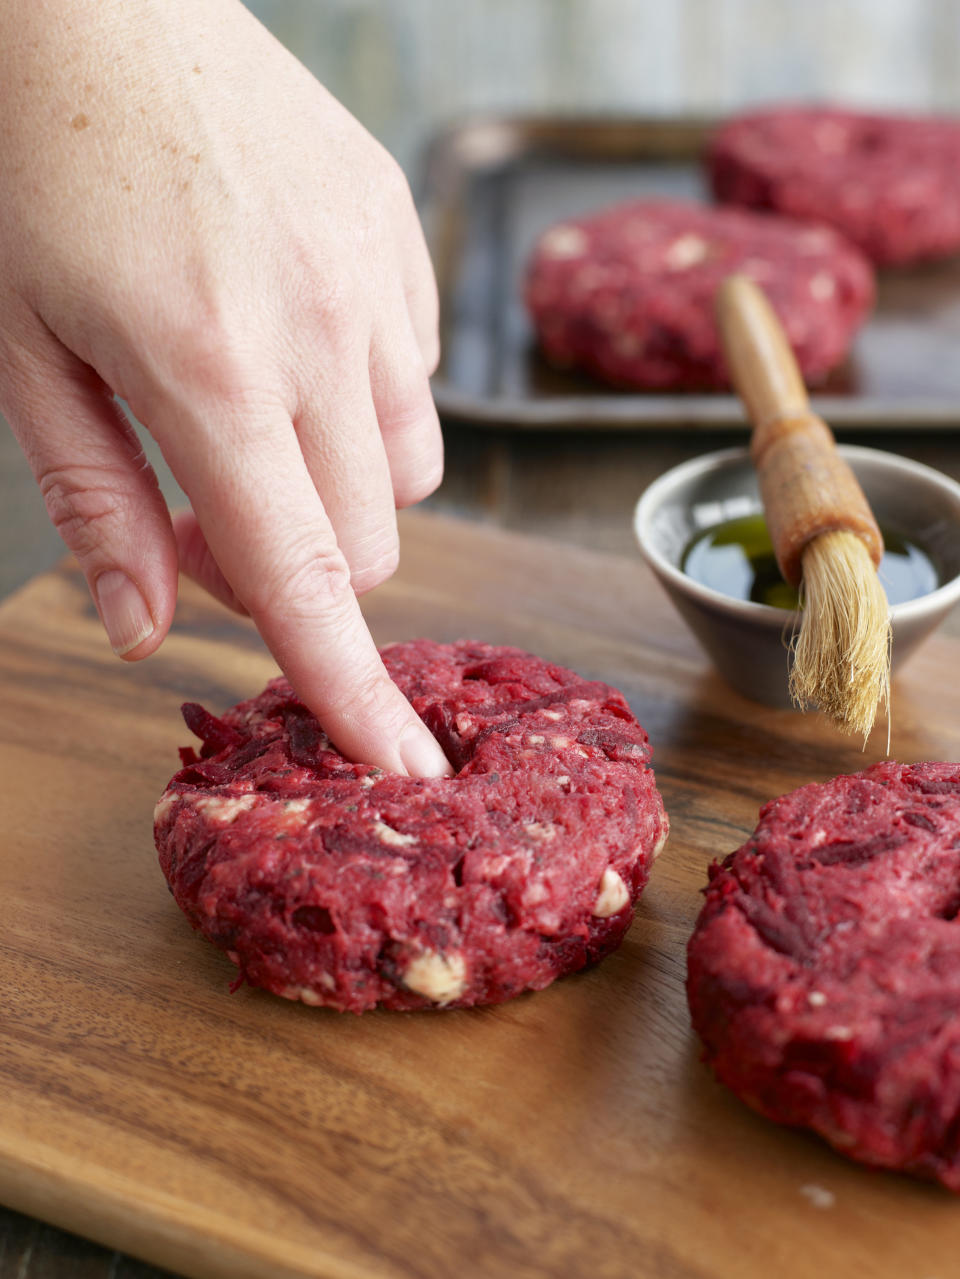 After shaping hamburger patties, make an indention in the center with your finger. Since the sides cook down faster then the center of the patty this trick will actually make the burger flat instead of rounded <a href="http://www.huffingtonpost.com/2014/07/17/flat-hamburger-patty_n_5531011.html" target="_blank">making it <em>way</em> better</a>. And flat burgers mean the toppings will stay where they belong -- on top.